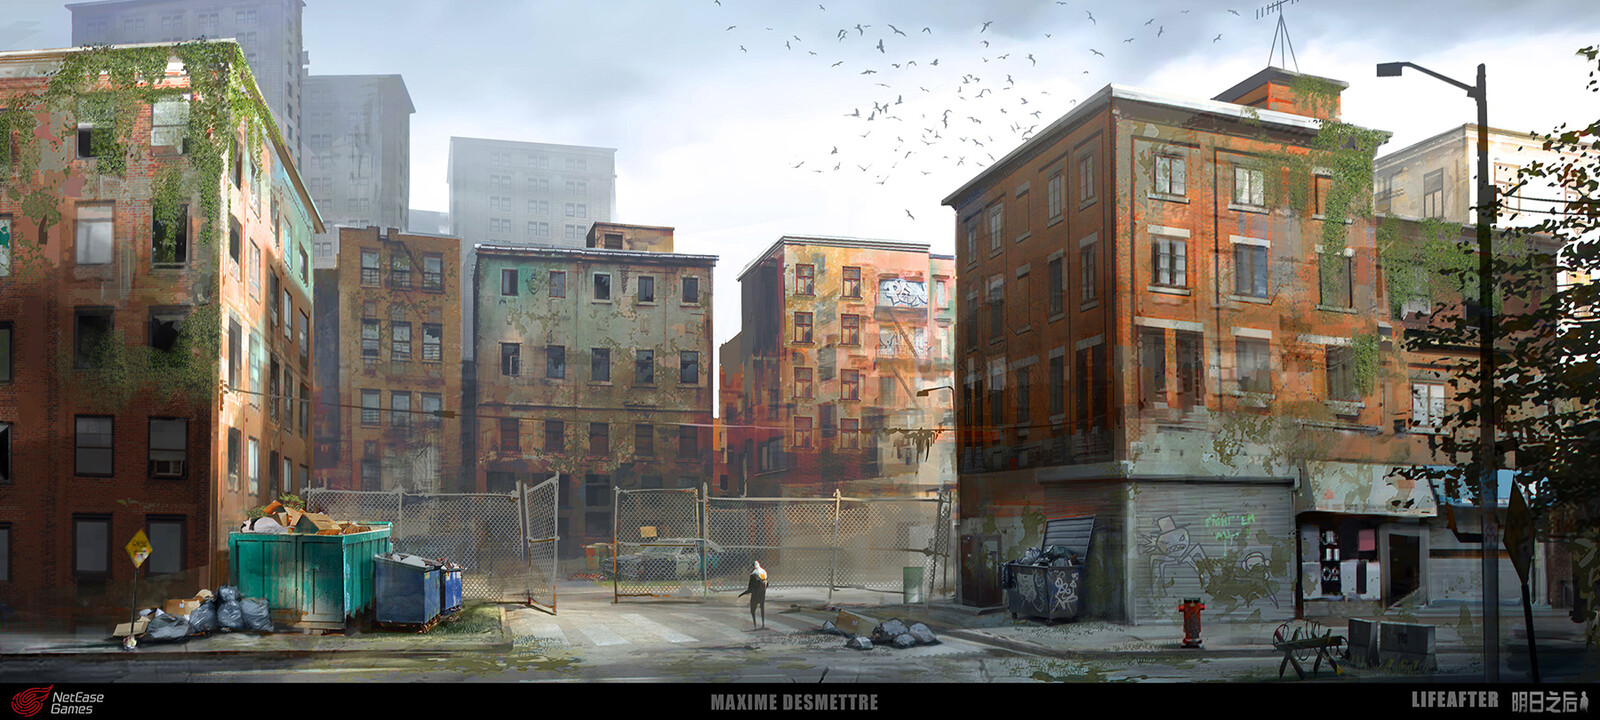 Life After - Residential Area
Concept Art (2019)